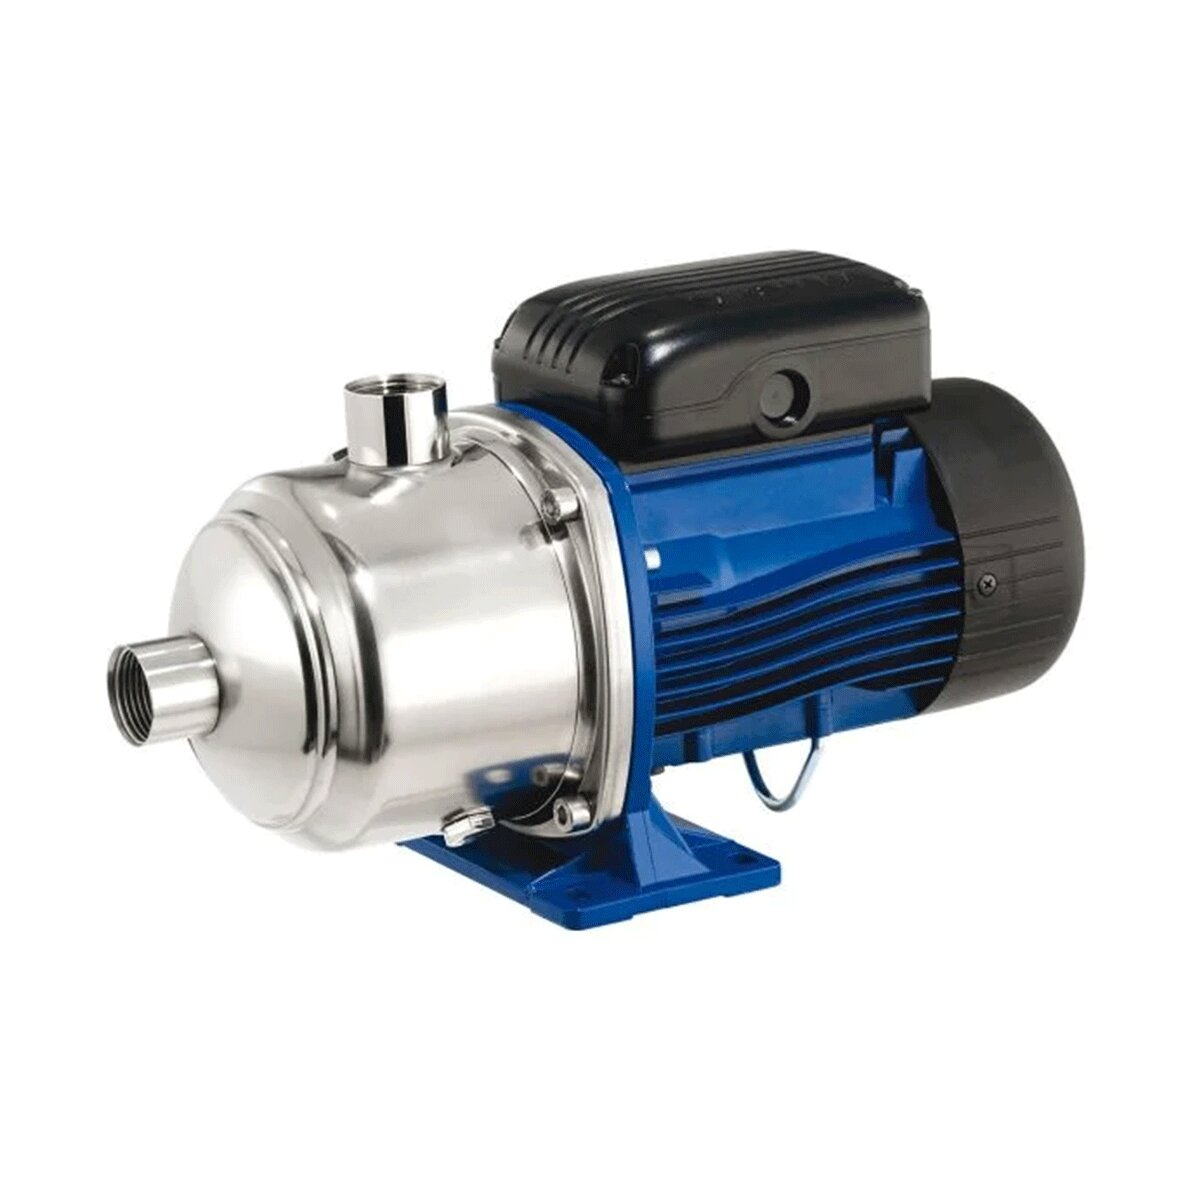 Lowara 5HM05 series multistage centrifugal surface pump IE2